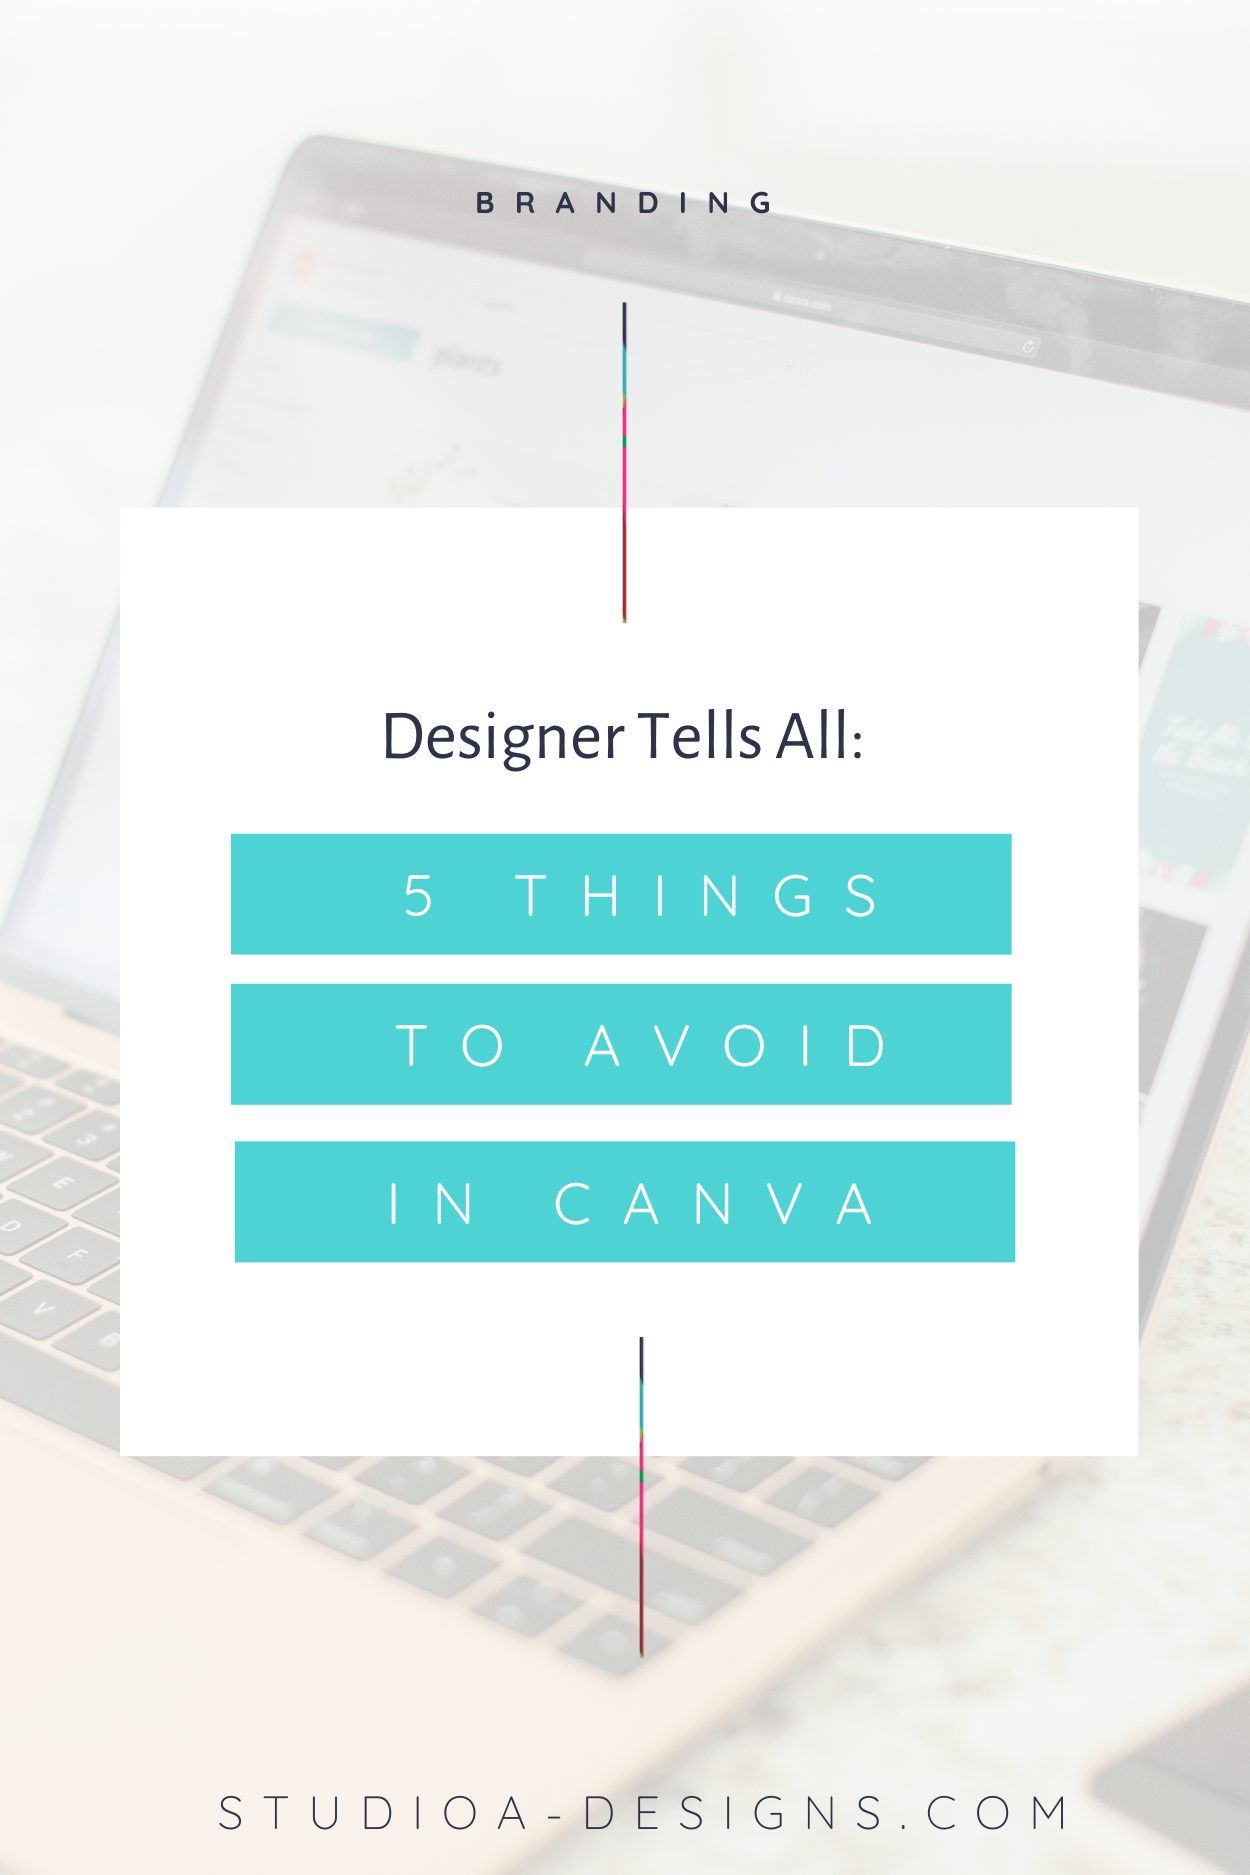 5 Things to Avoid In Canva